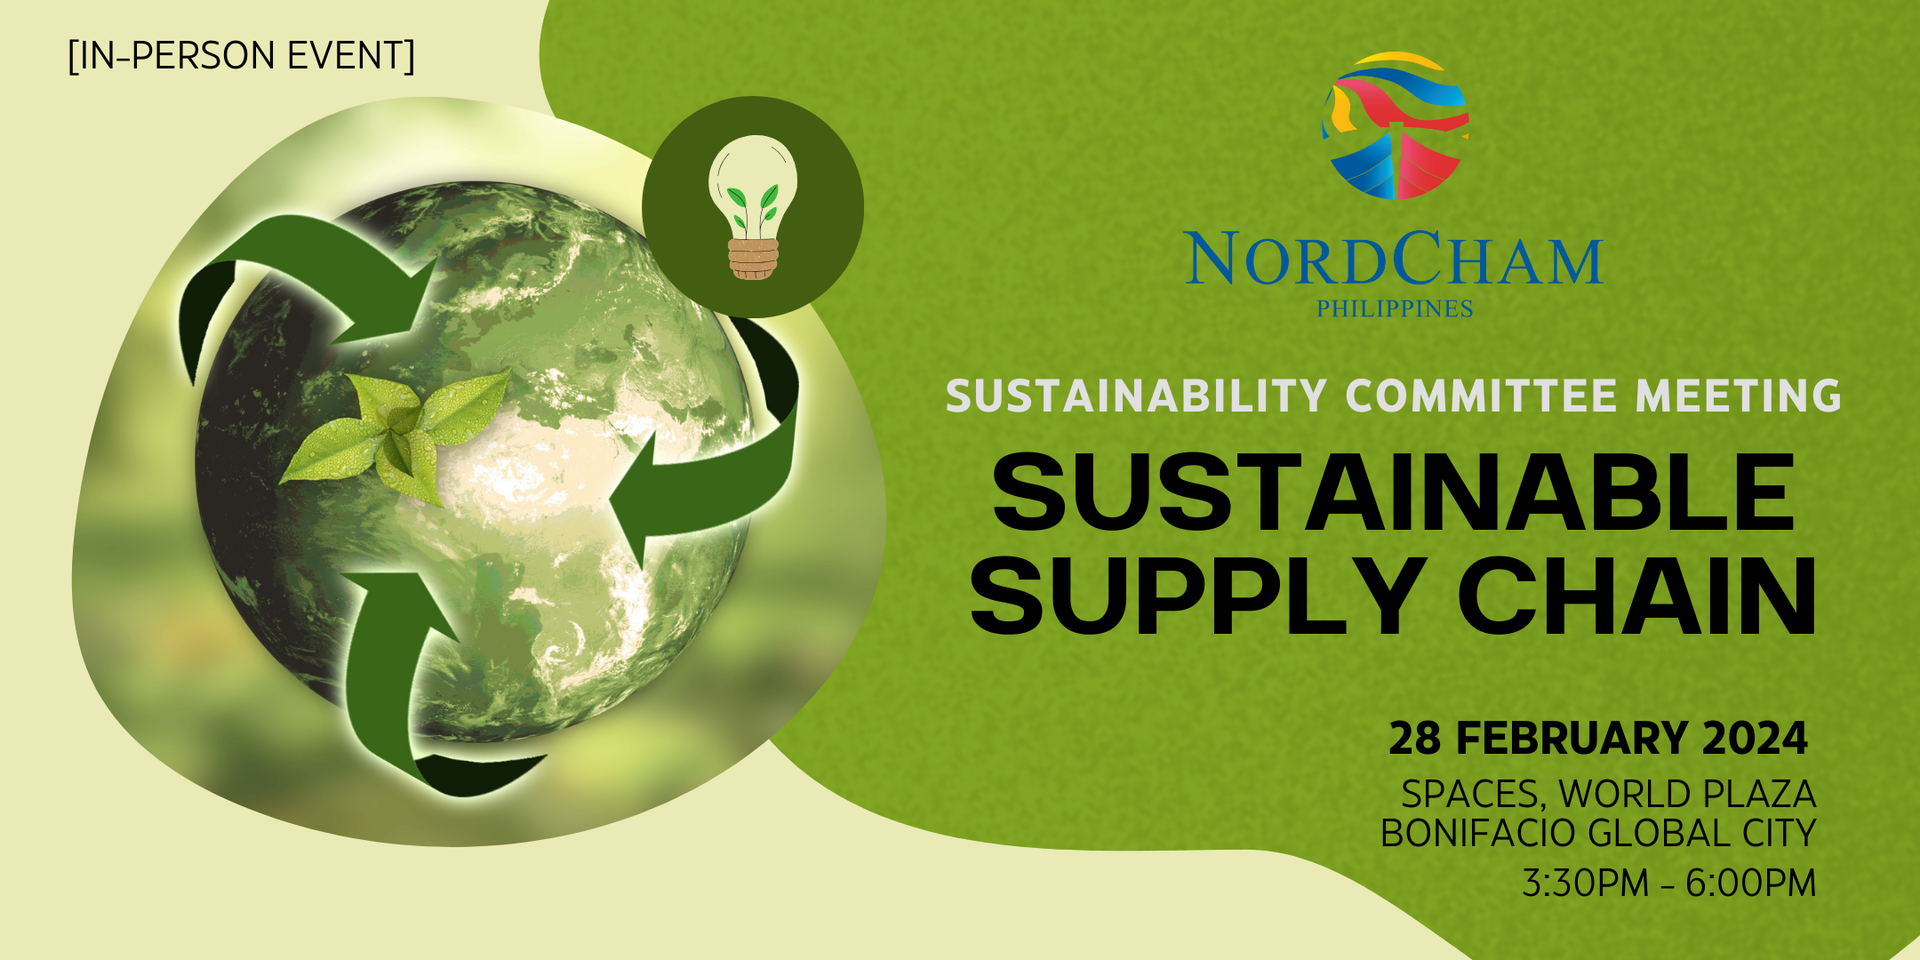 thumbnails SUSTAINABILITY COMMITTEE MEETING: SUSTAINABLE SUPPLY CHAIN | 28 FEBRUARY 2024 | SPACES, WORLD PLAZA, BGC